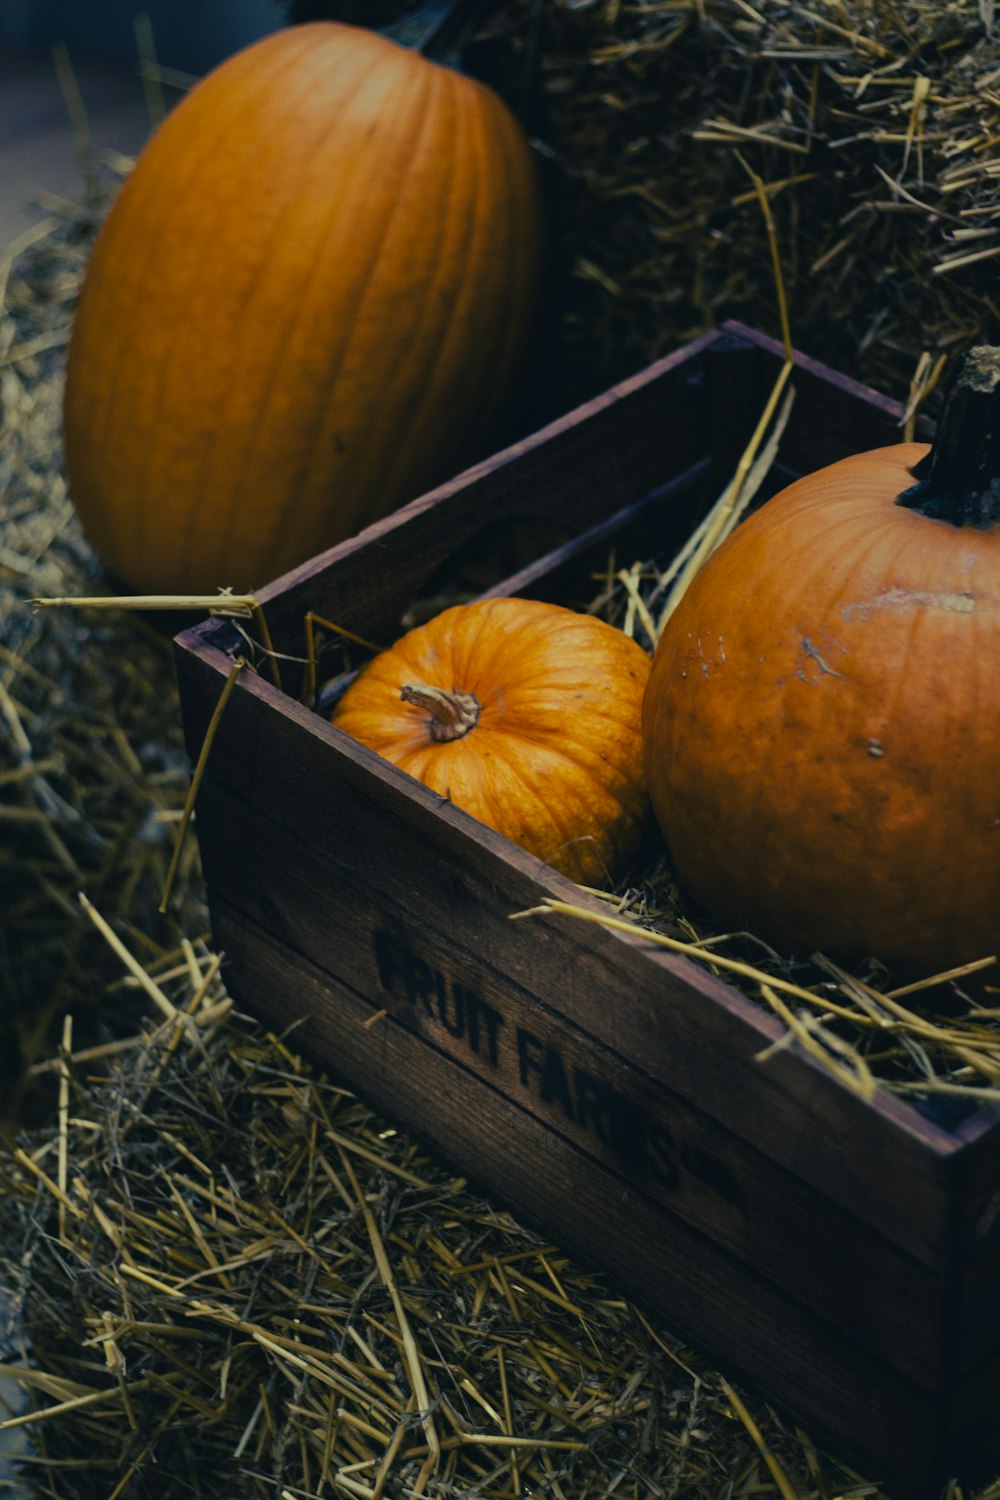 two pumpkins sitting in a wooden crate on hay